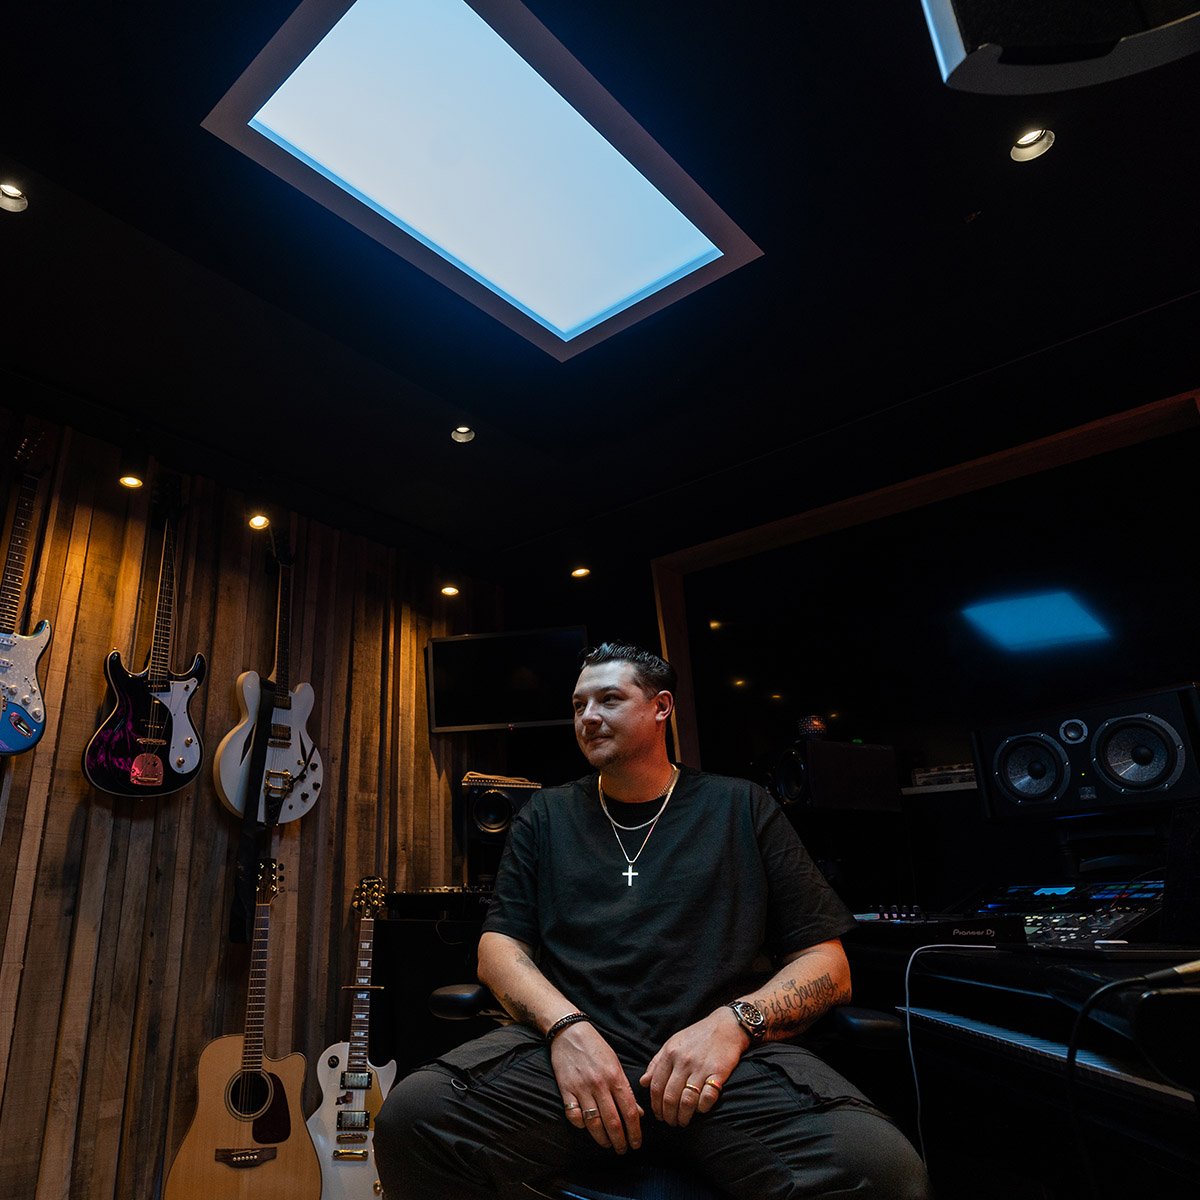 Innerscene Virtual Sun installation case study preview with the acclaimed British singer, songwriter, and record producer John Newman sitting in his studio with guitars, speakers, and other musical equipment